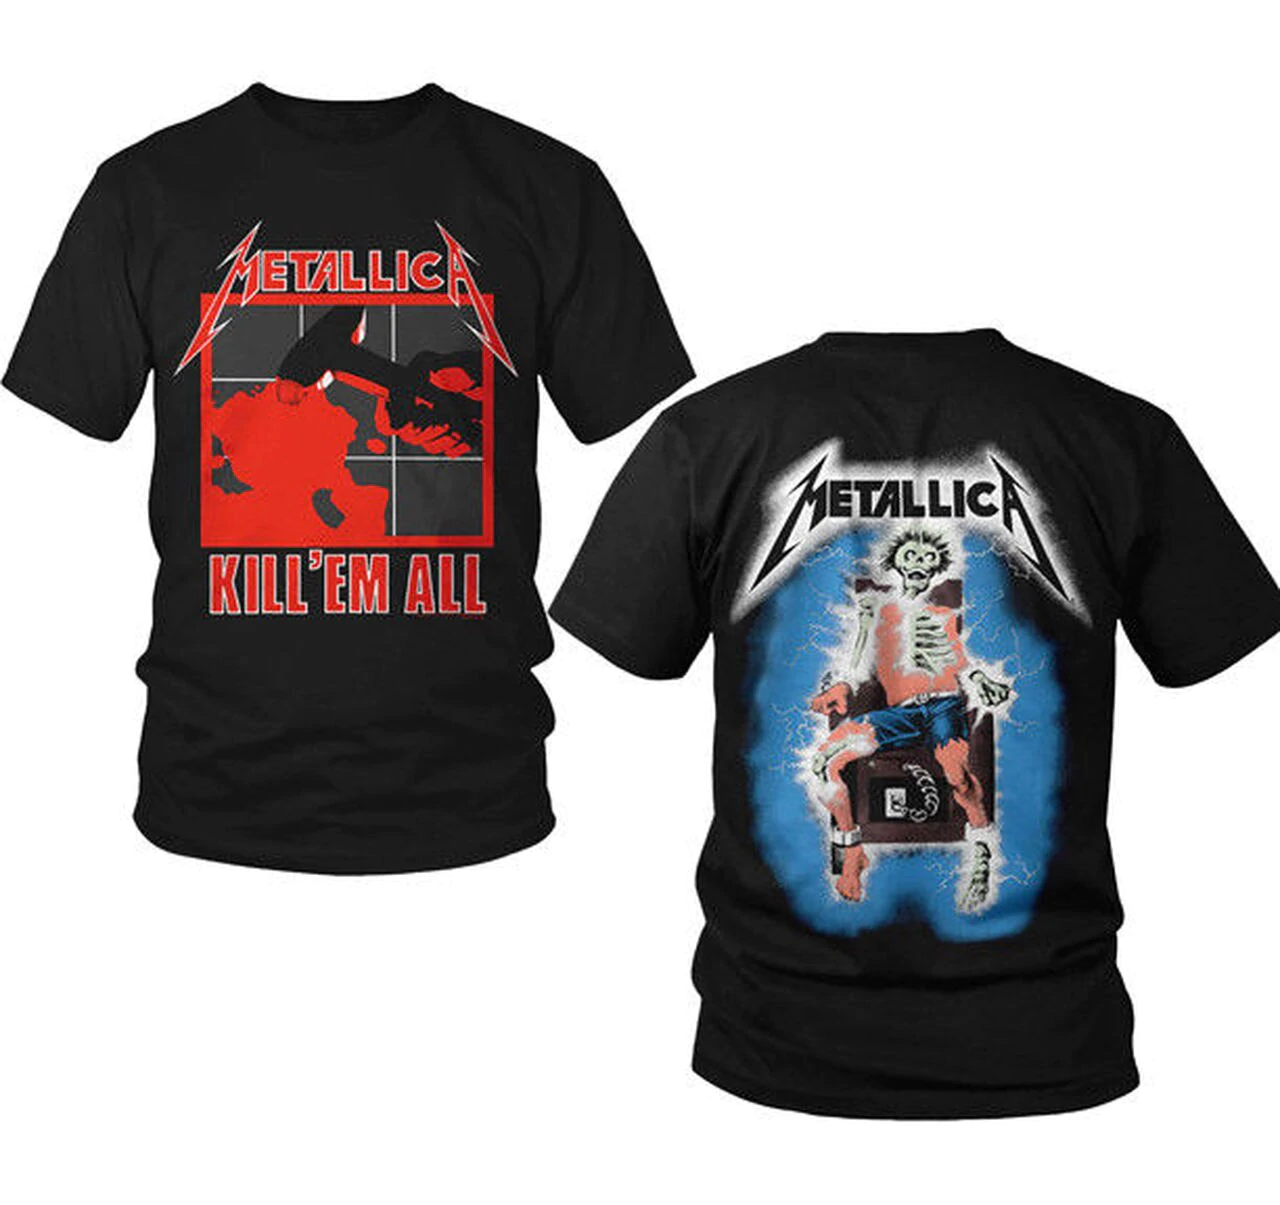 METALLICA - KILL 'EM ALL - T-Shirt - Printed Front And Back